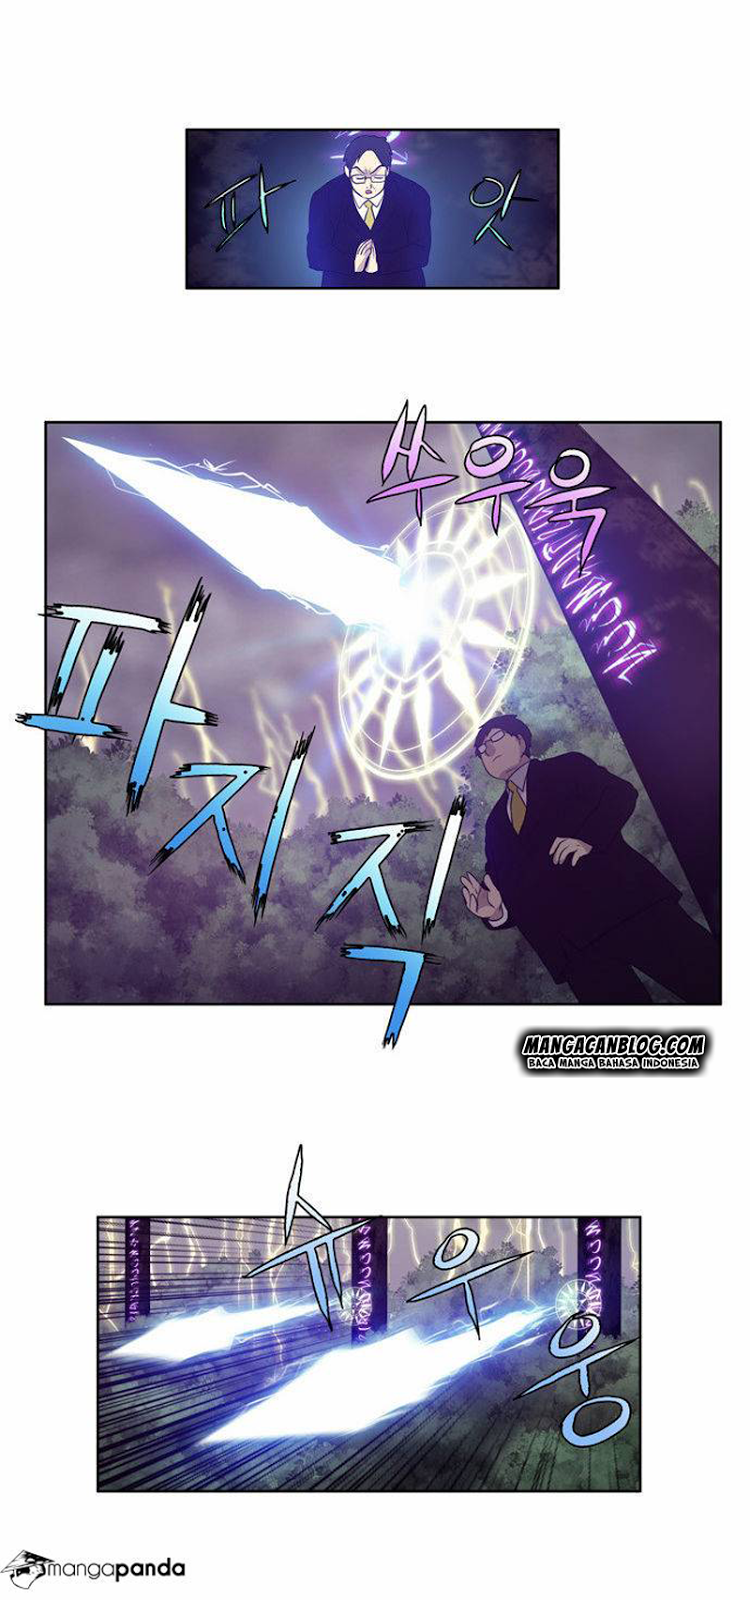 The Gamer Chapter 81